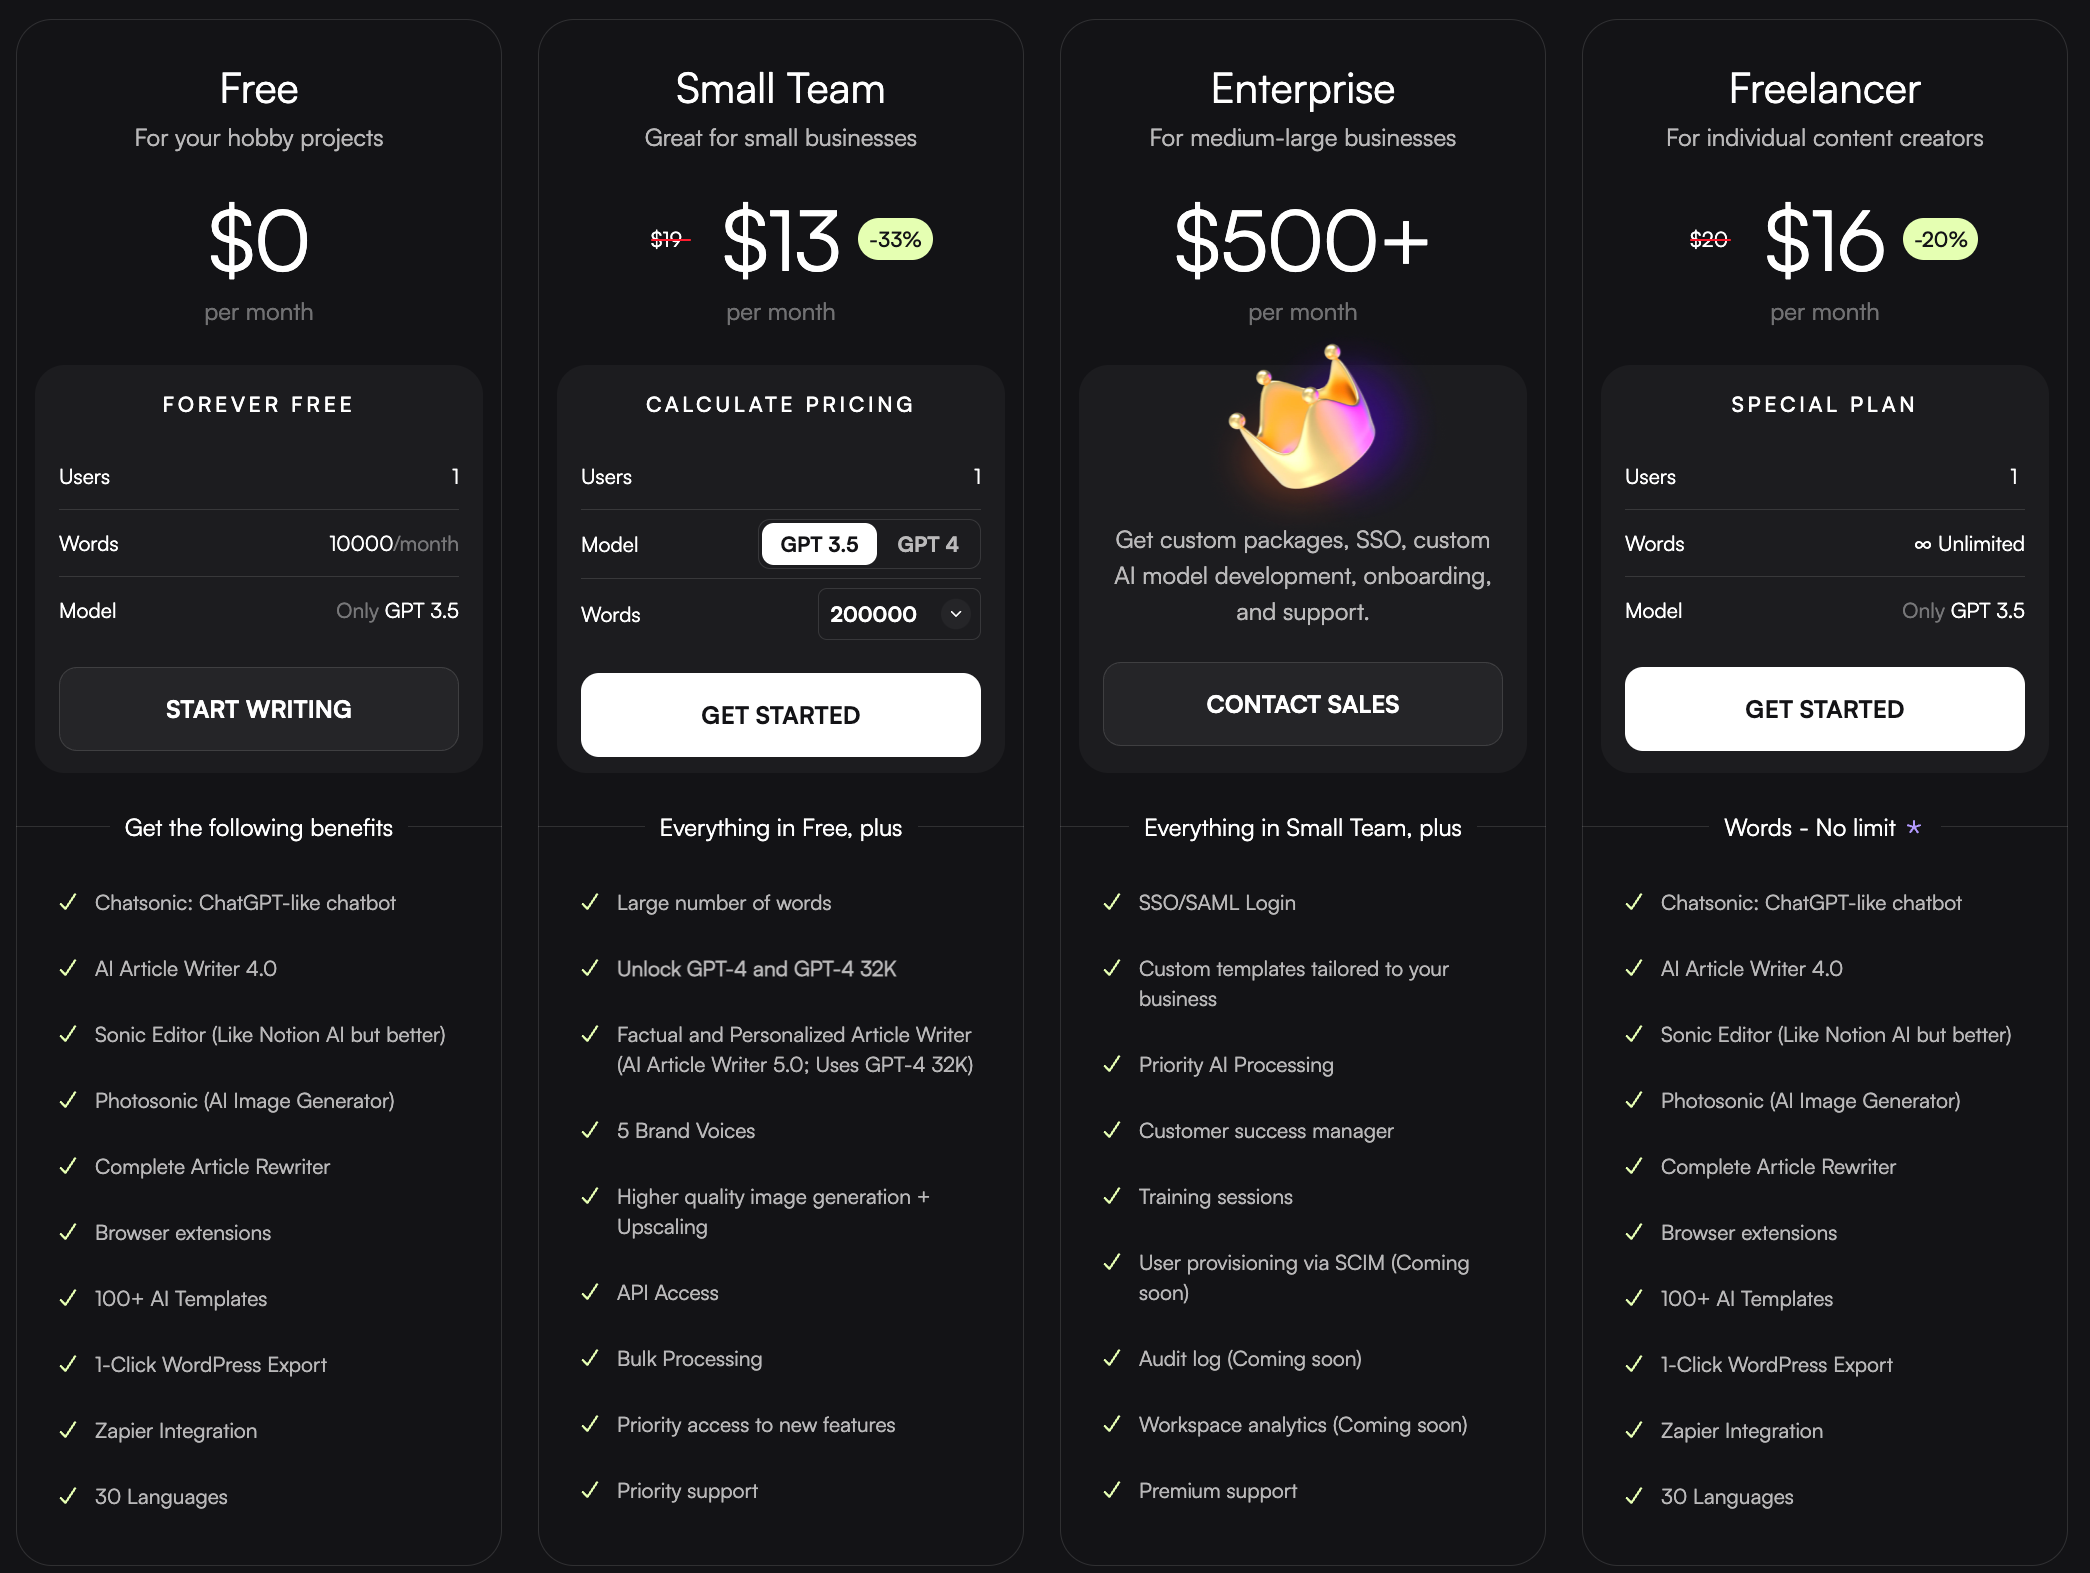 Four different pricing plans that include a free version, a small team version for $13 a month, Freelancer for $16 a month, and enterprise for $500 a month